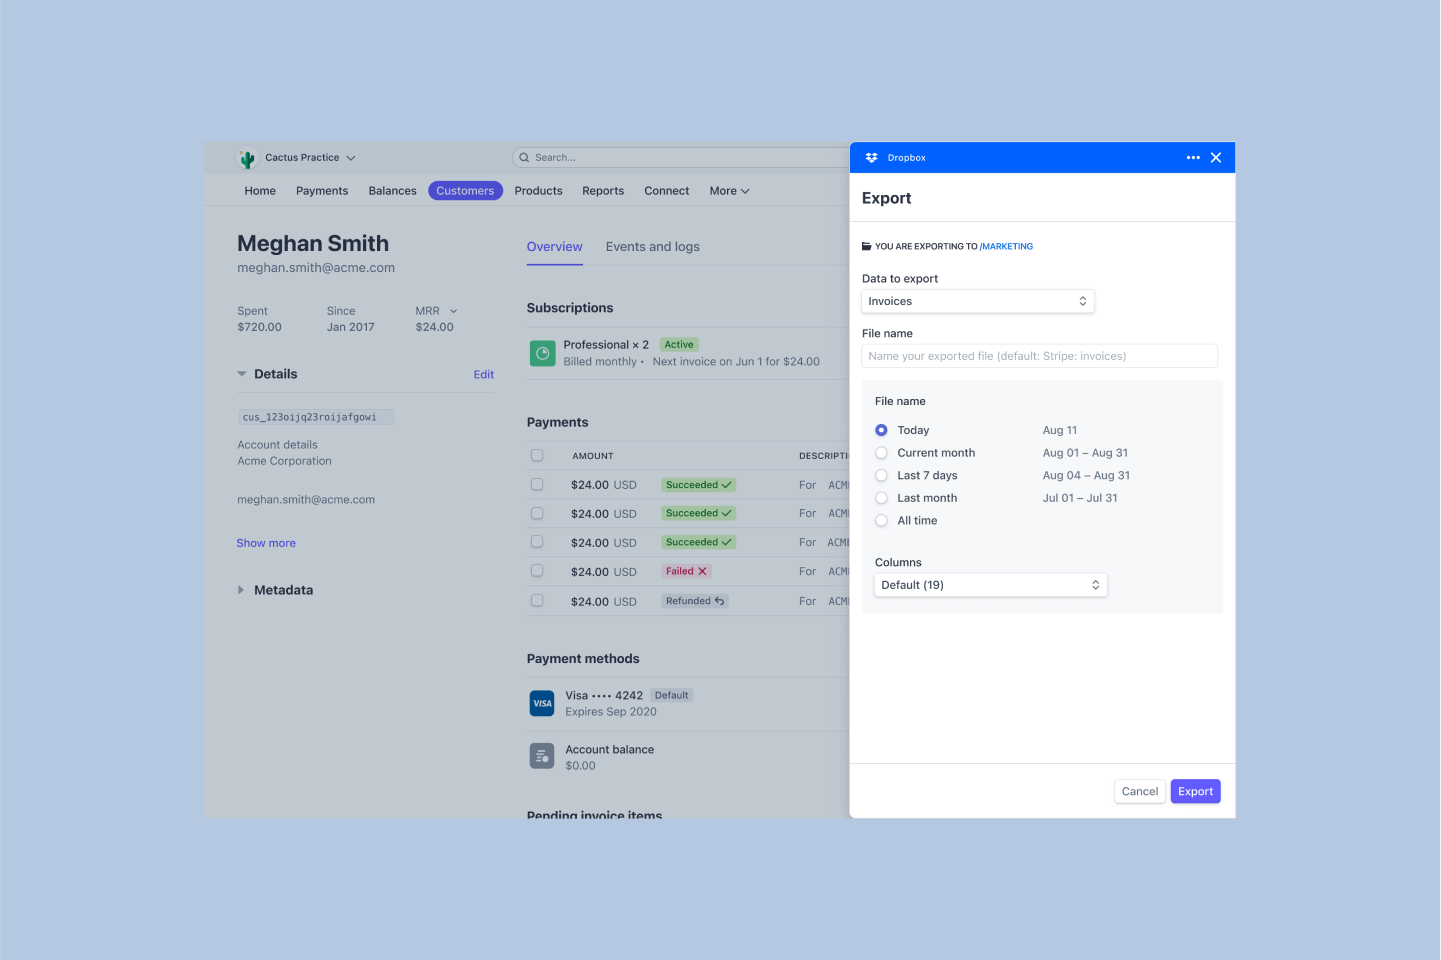 Someone exporting data to Dropbox from Customers section of Stripe dashboard